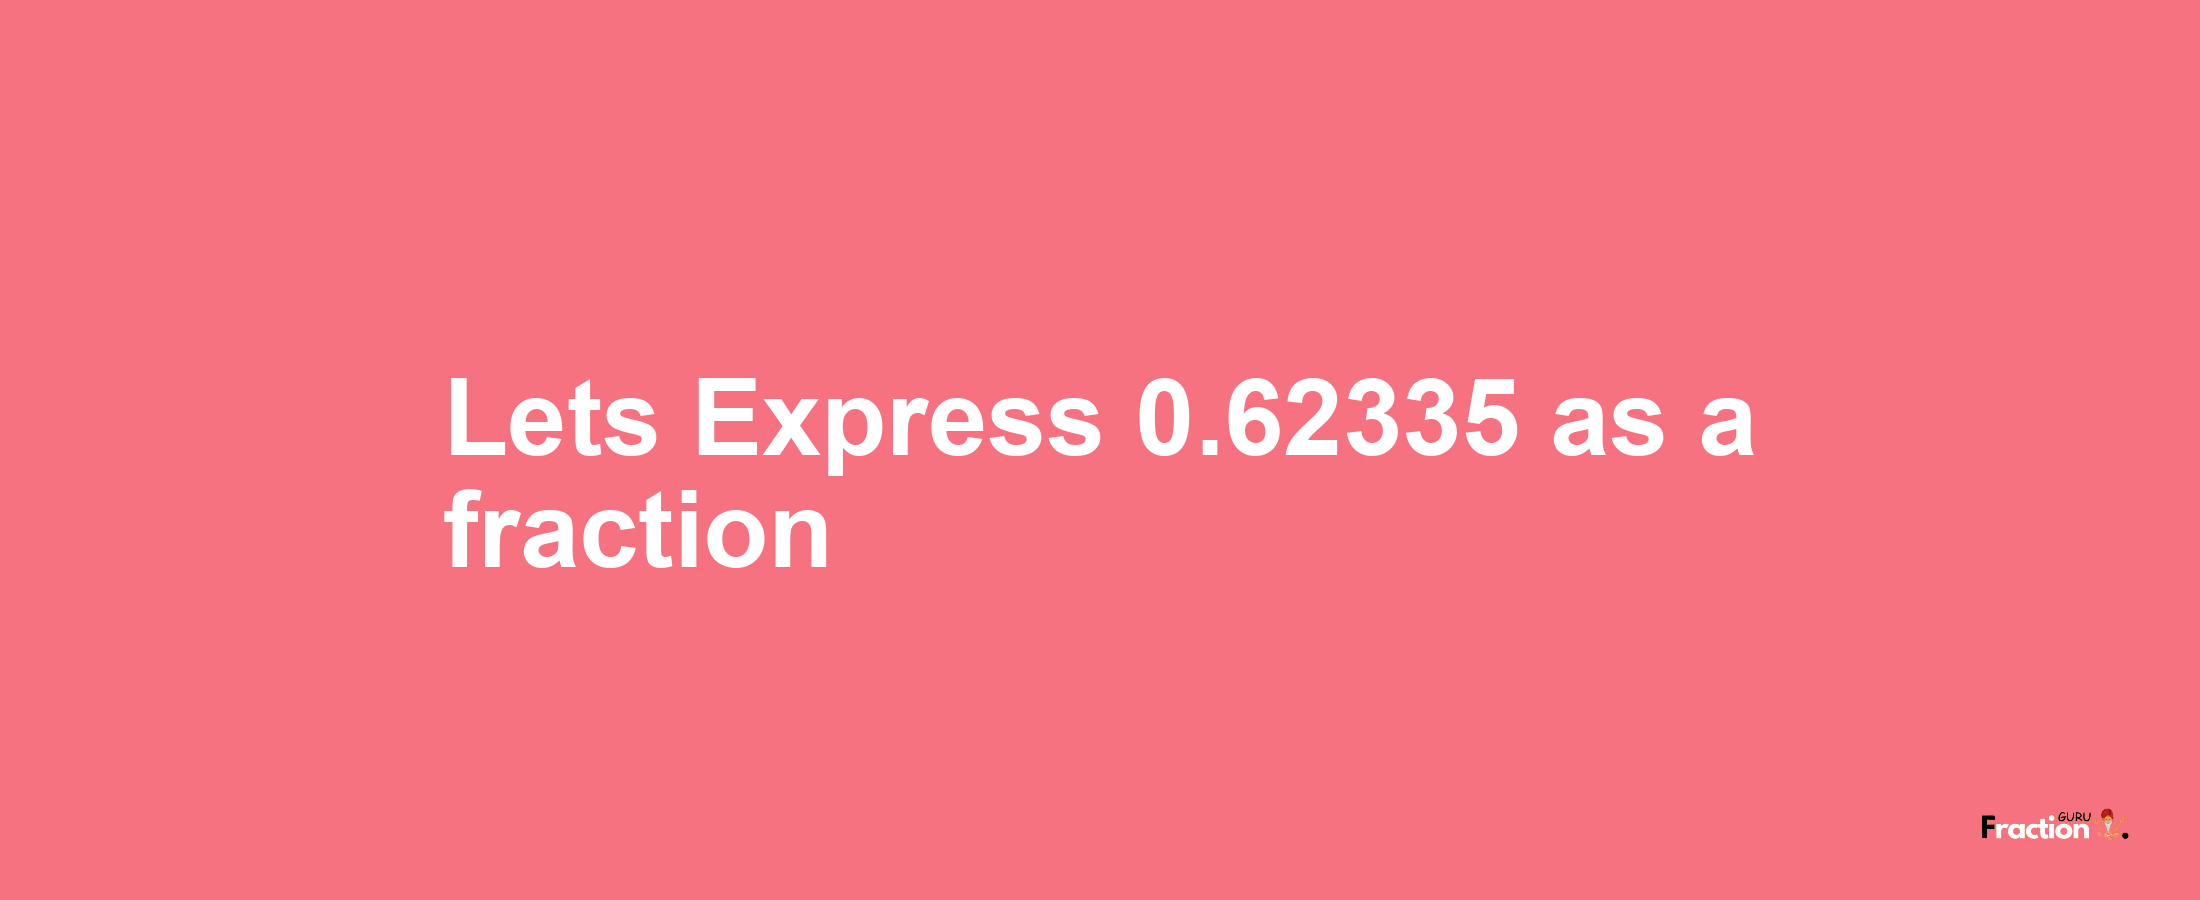 Lets Express 0.62335 as afraction